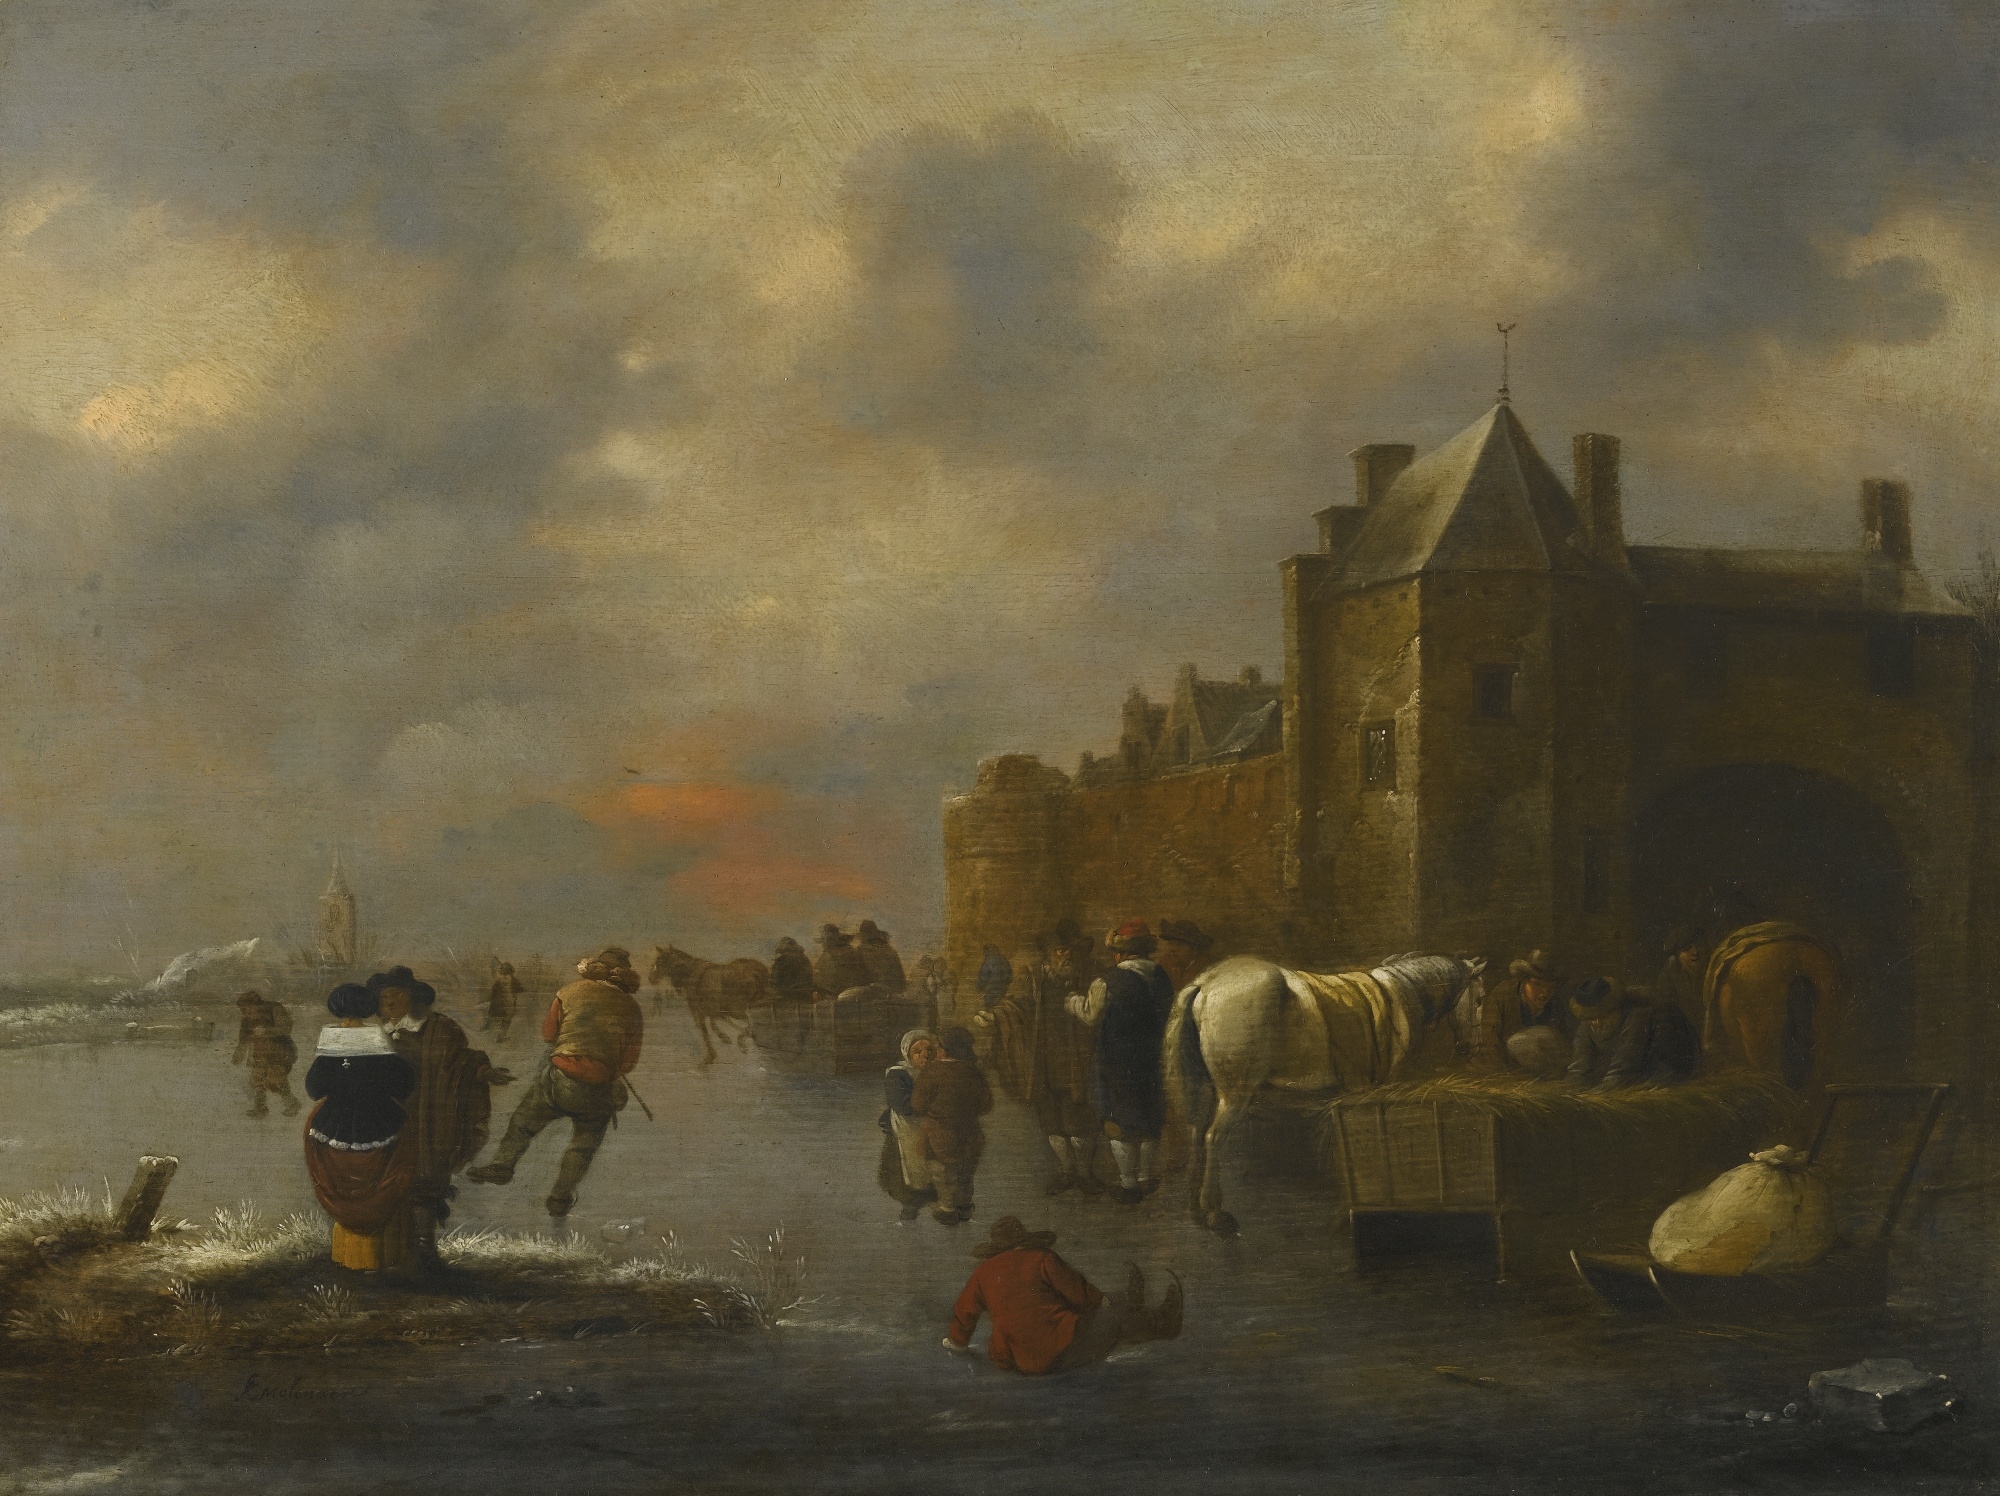 WINTER LANDSCAPE WITH SKATERS ON A RIVER NEAR A WALLED TOWN by Klaes Molenaer